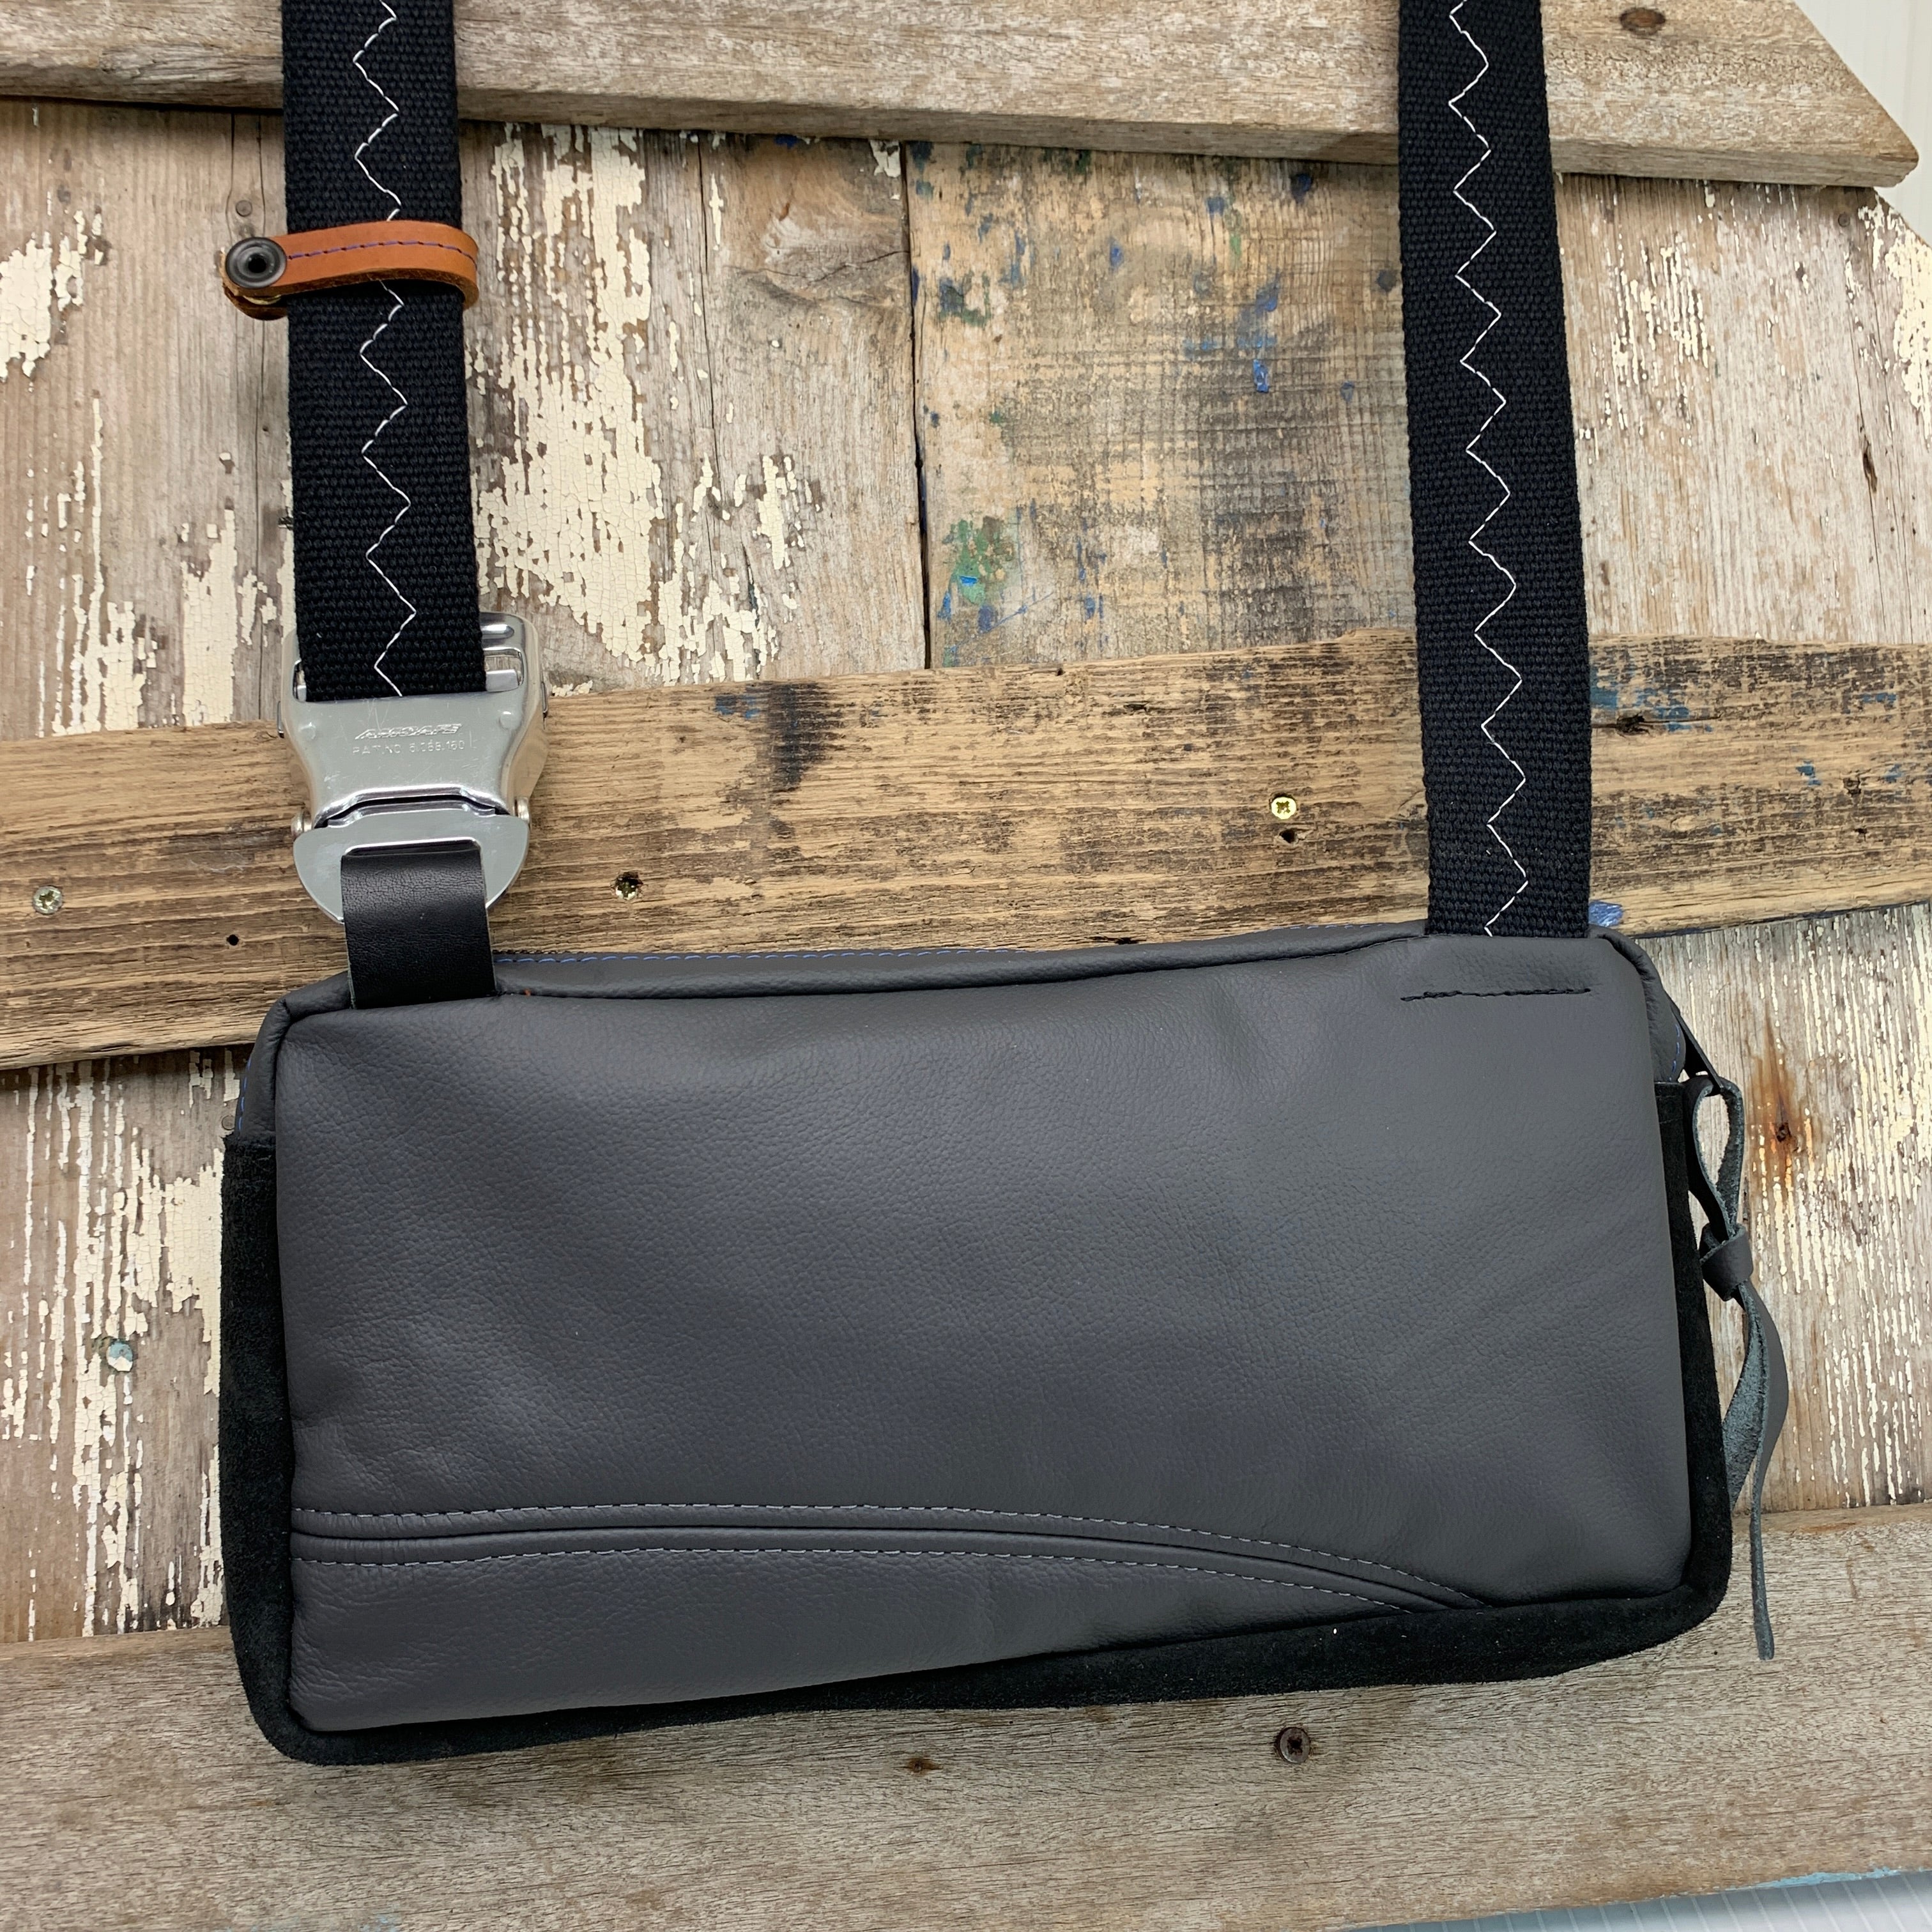 The Quest Sling Bag